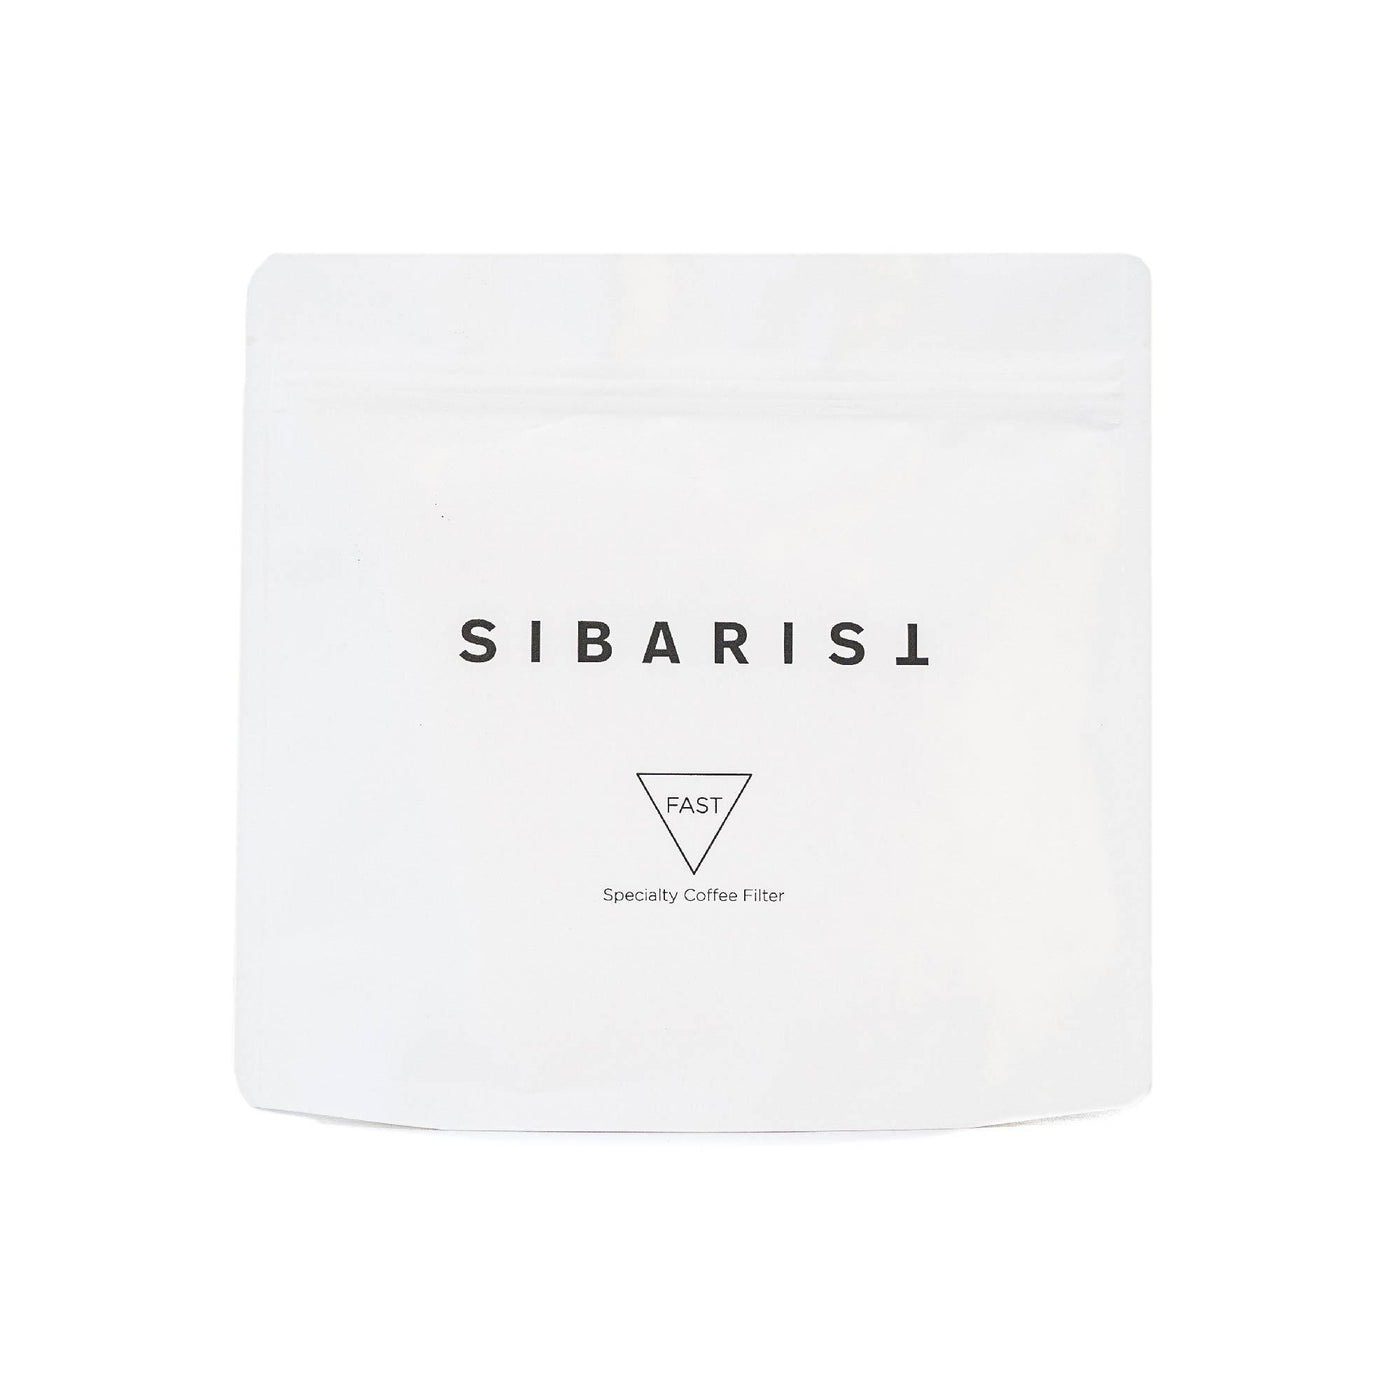 Sibarist FAST Specialty Coffee Filter